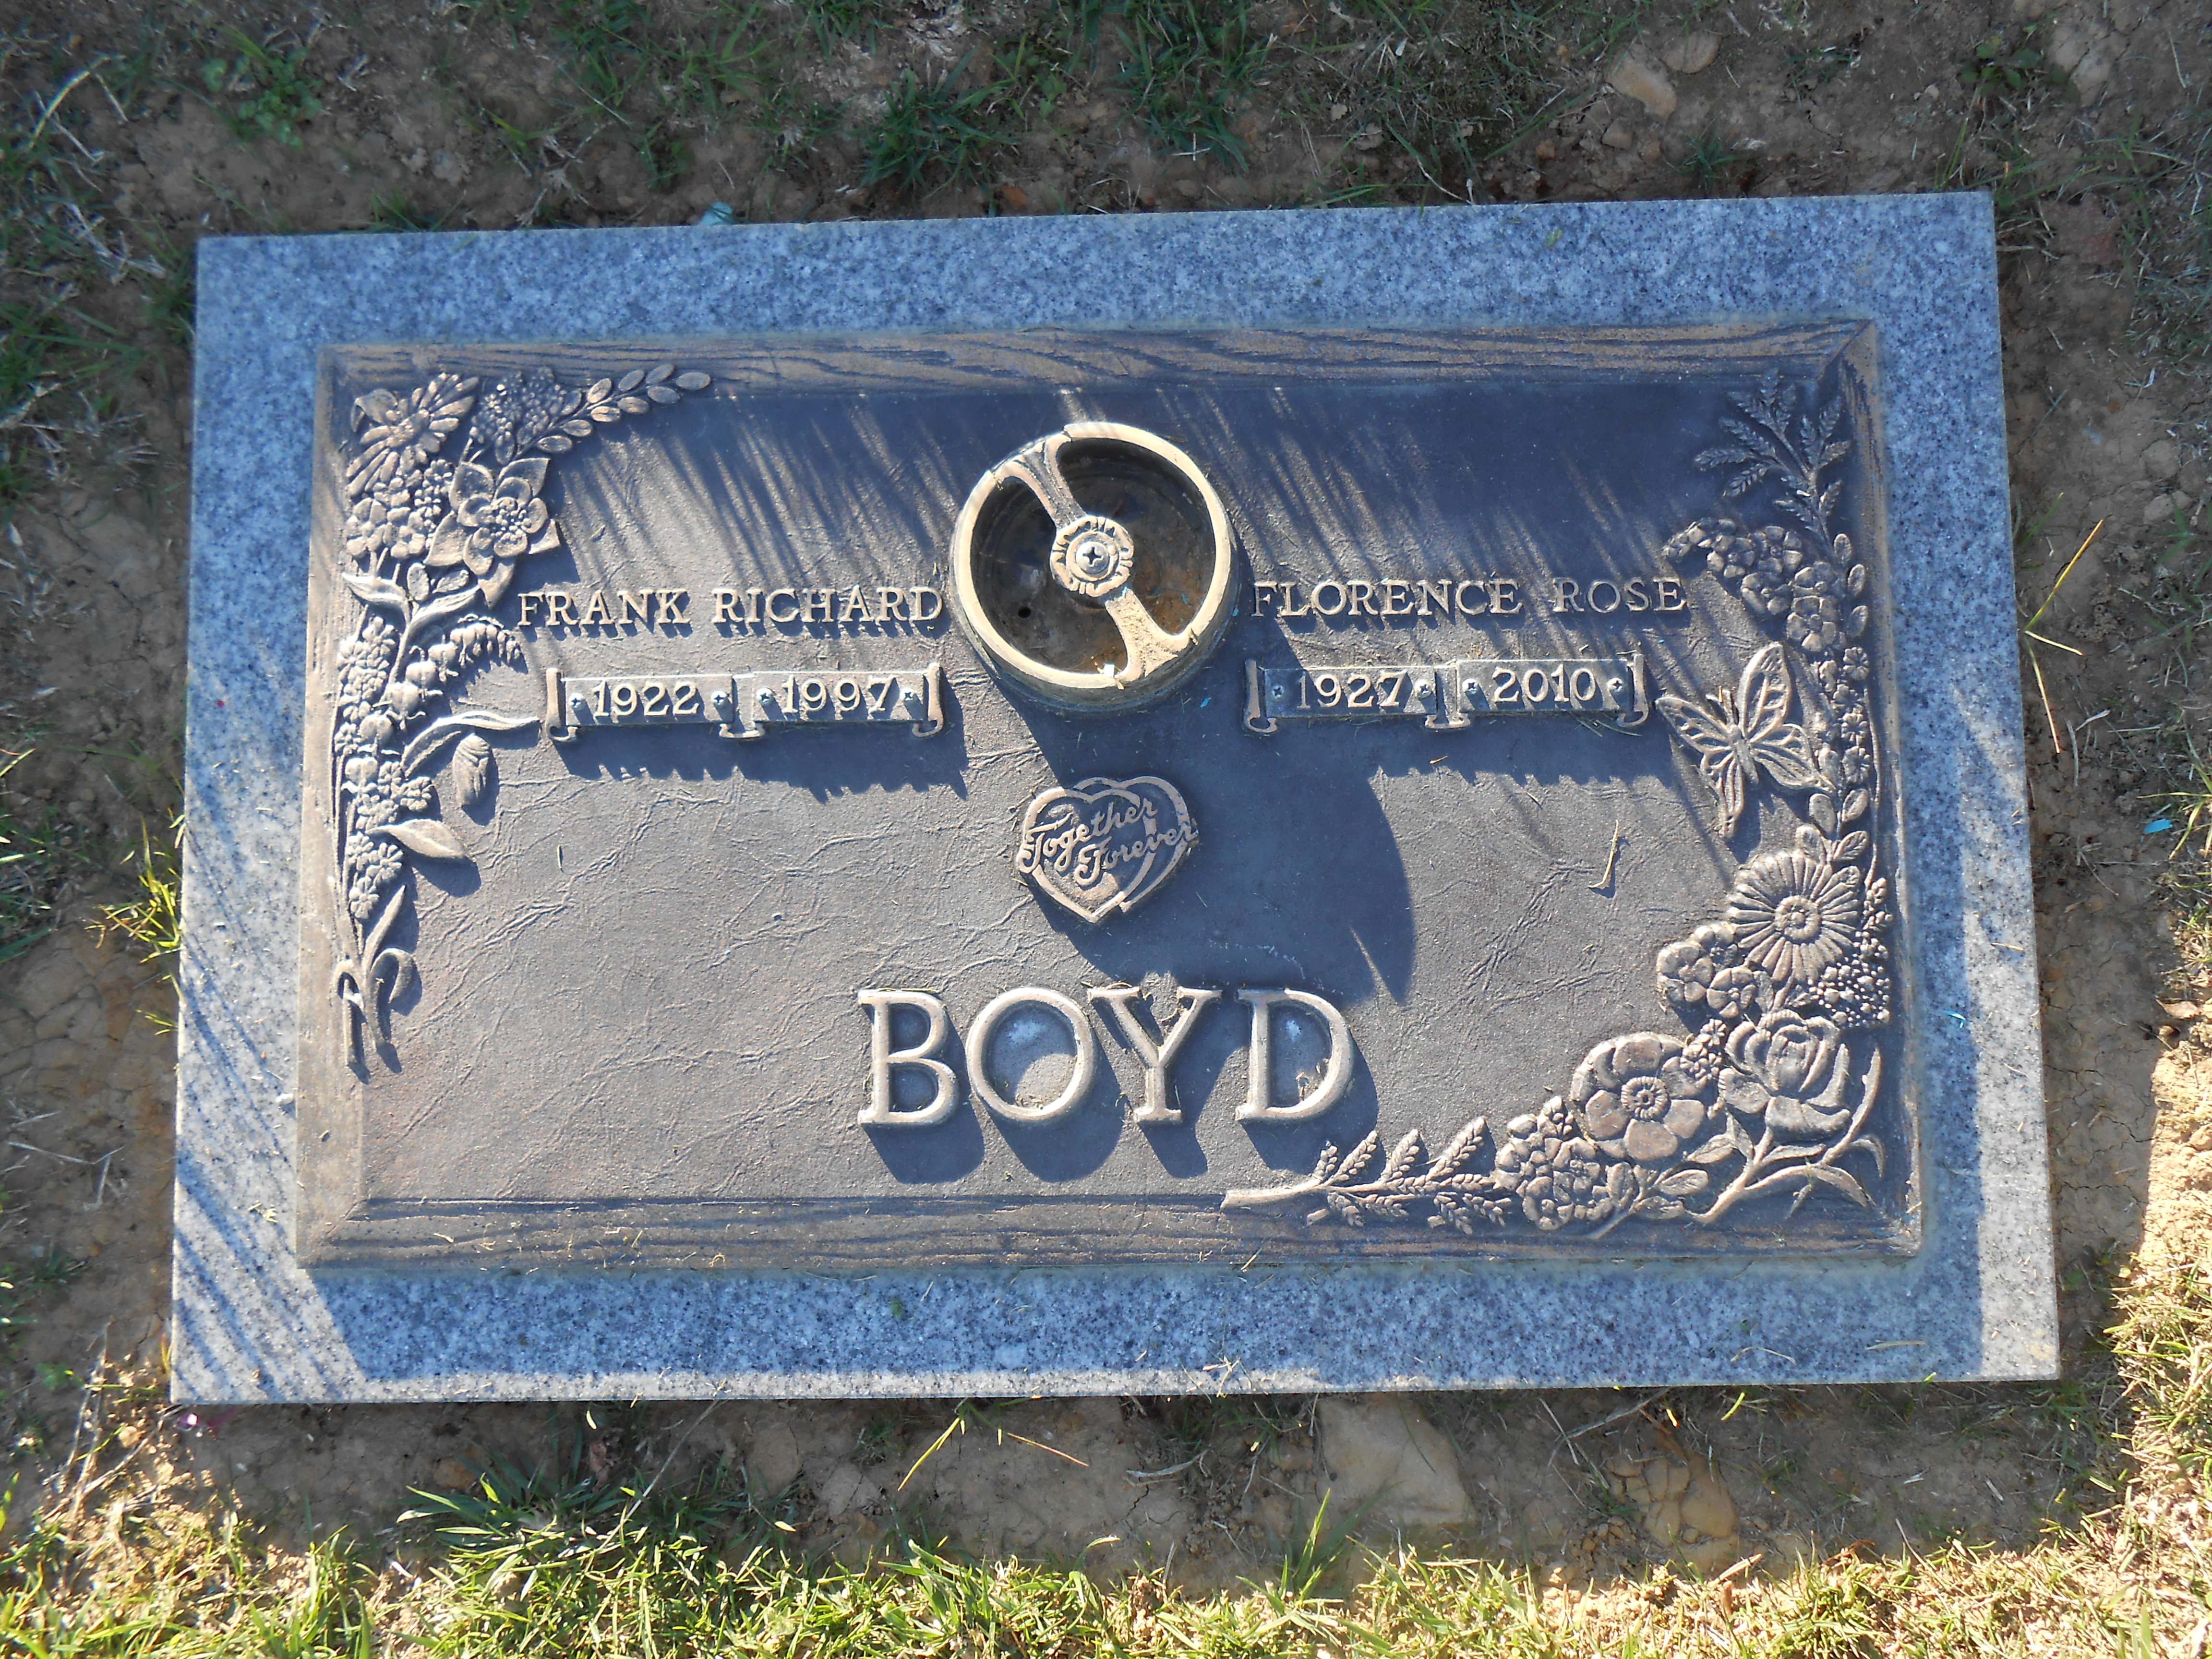 Gravestone of Frank Richard and Florence Rose Boyd